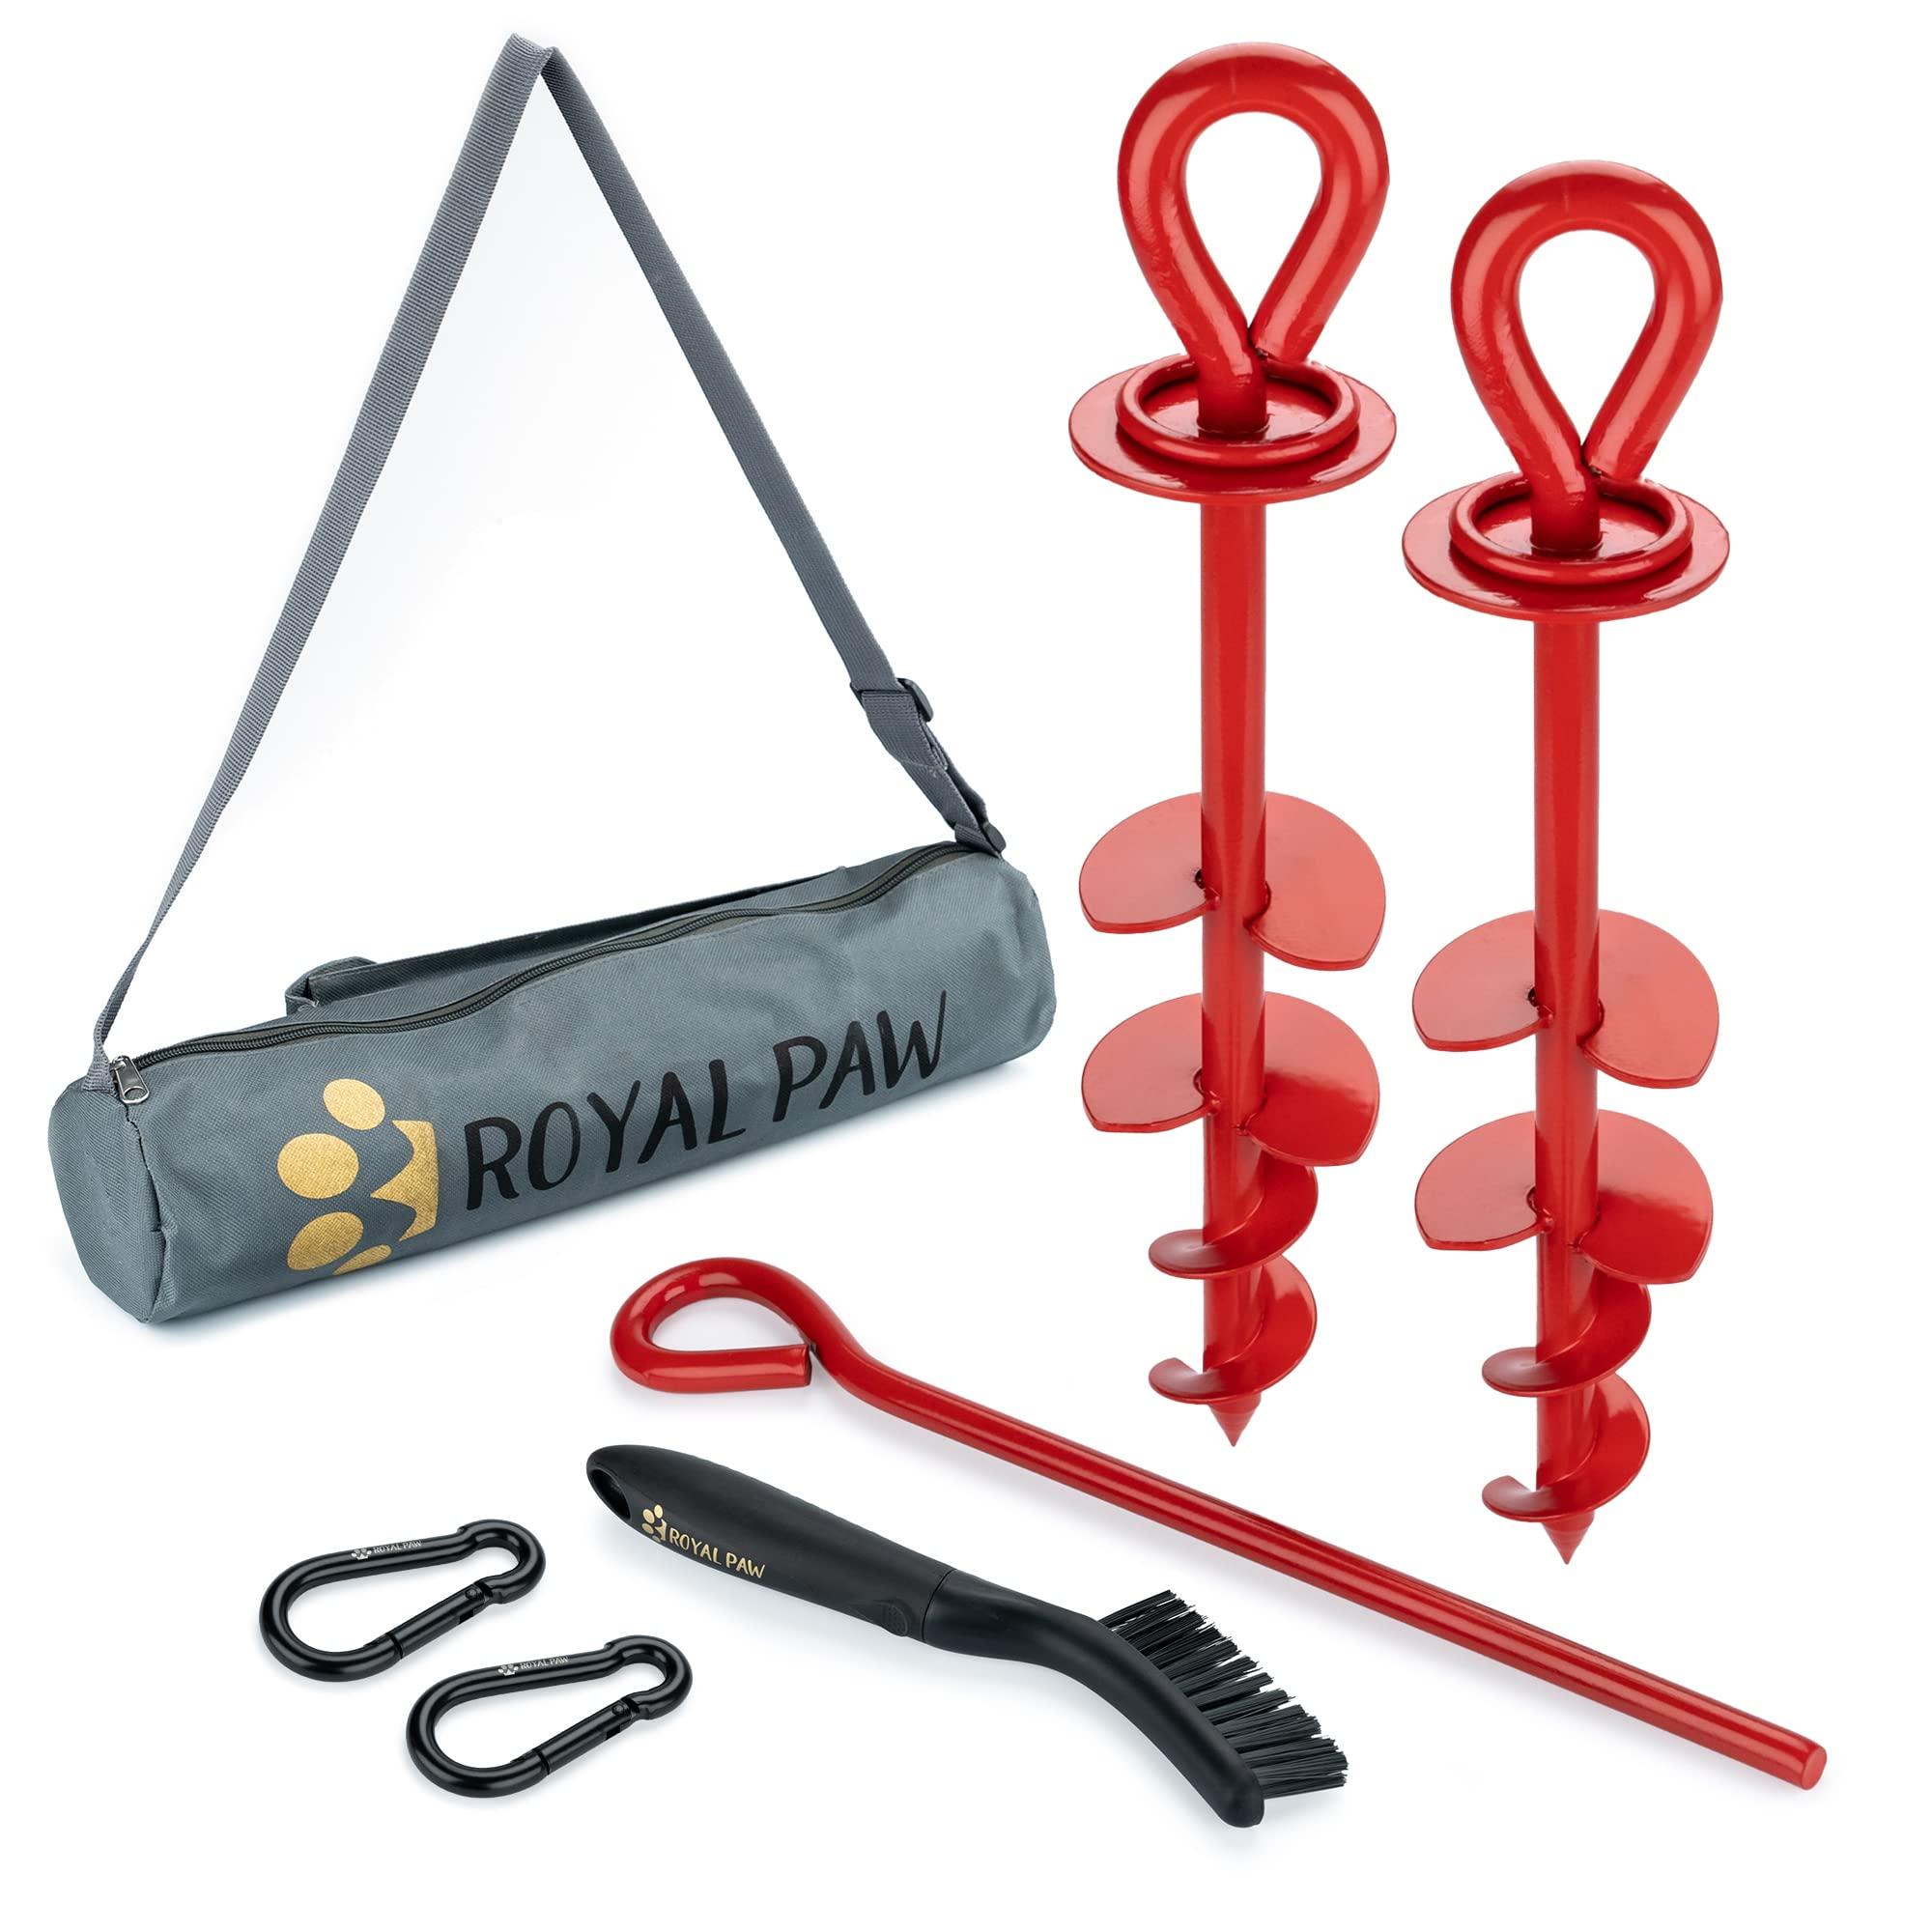 Heavy Duty Dog Tie Out Stake - Premium Dog Anchor for Large Dog, Dog Stake for Yard, Dog Tether, and Dog Runner | Use Any Dog Tie Out or Dog Lead (Medium/Large/XL, R2-Crimson Red (2-Pack))